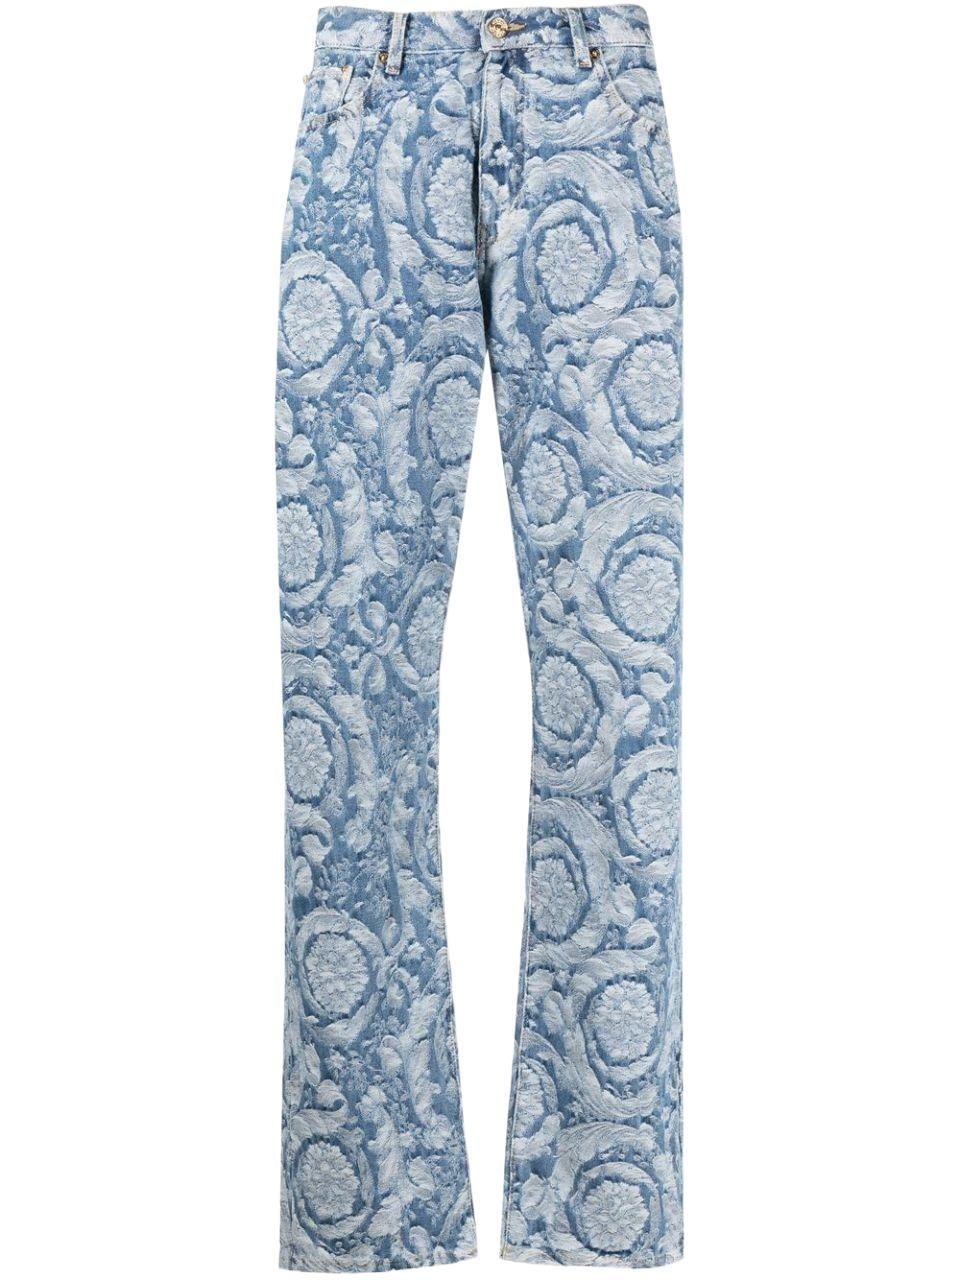 Versace Barocco Silhouette Patterned Jeans in Blue for Men | Lyst